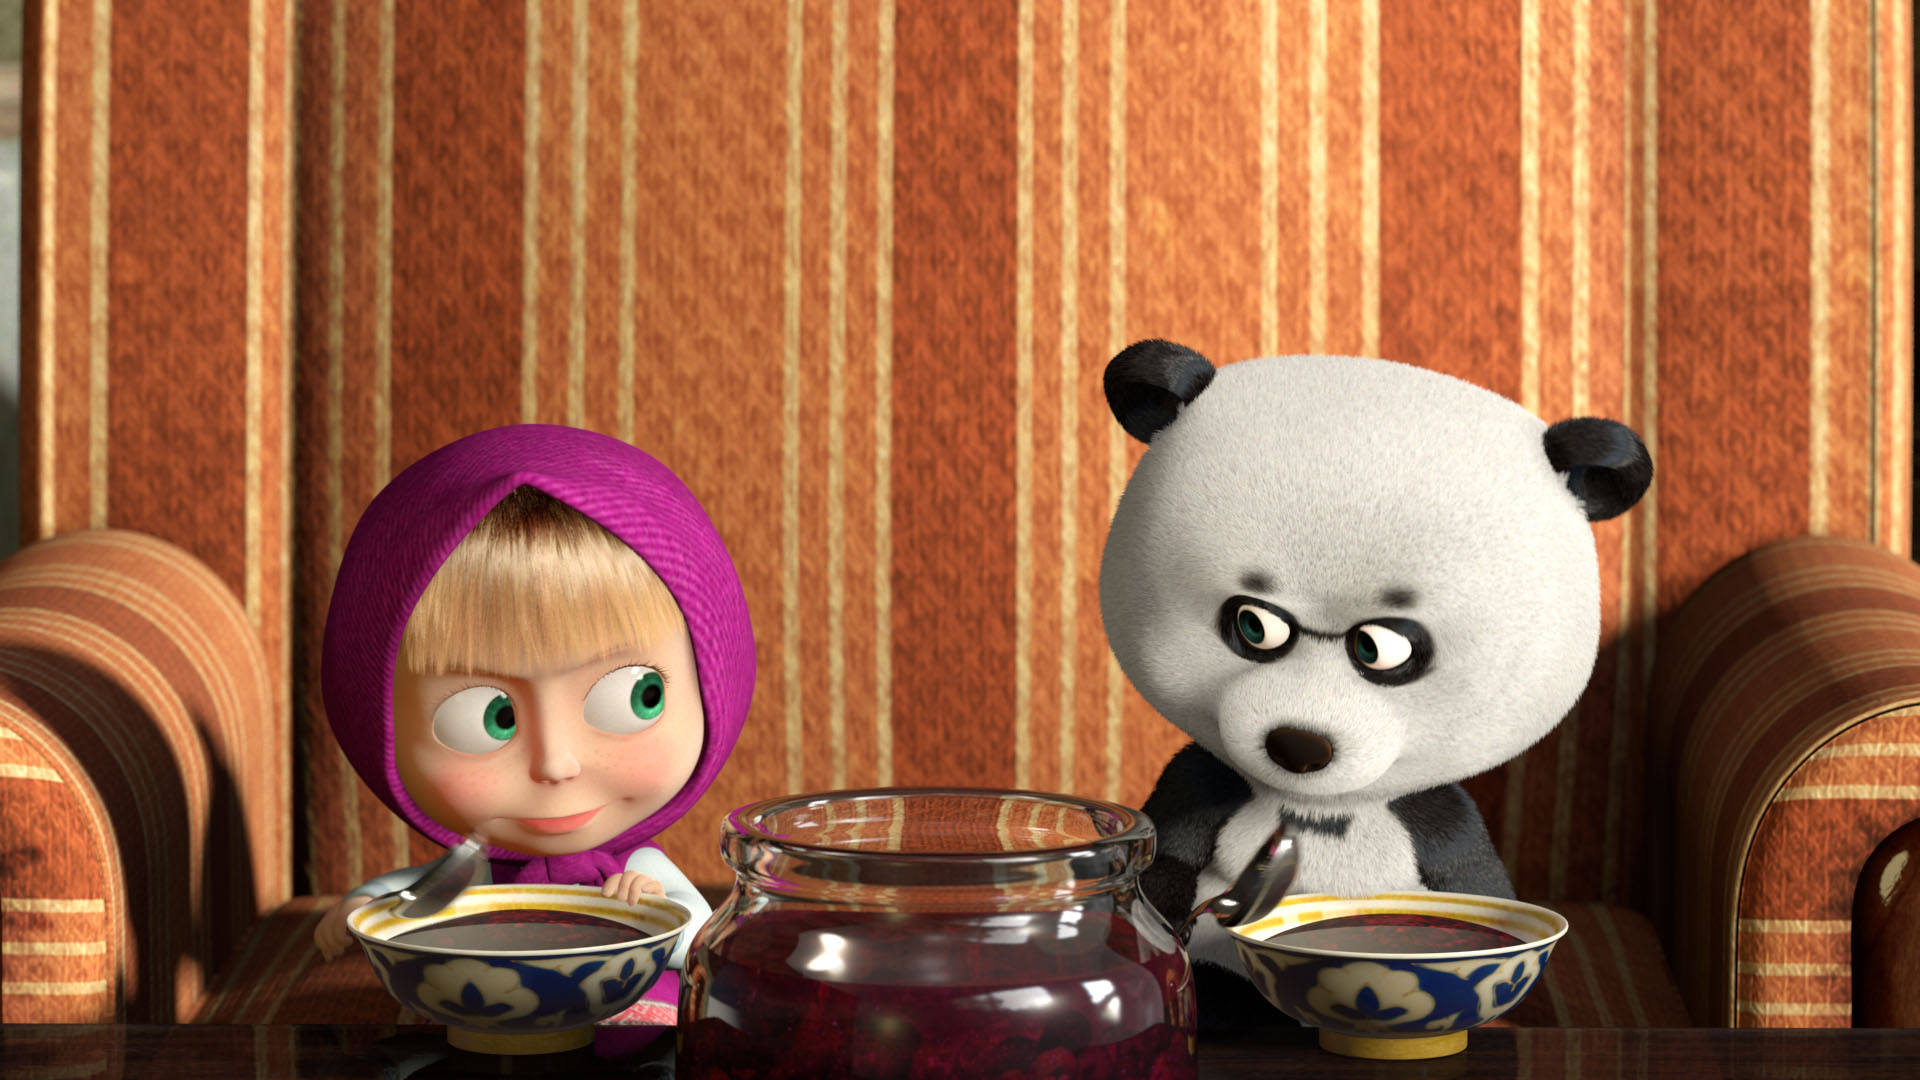  Masha and the Bear wallpapers and images  wallpapers, pictures